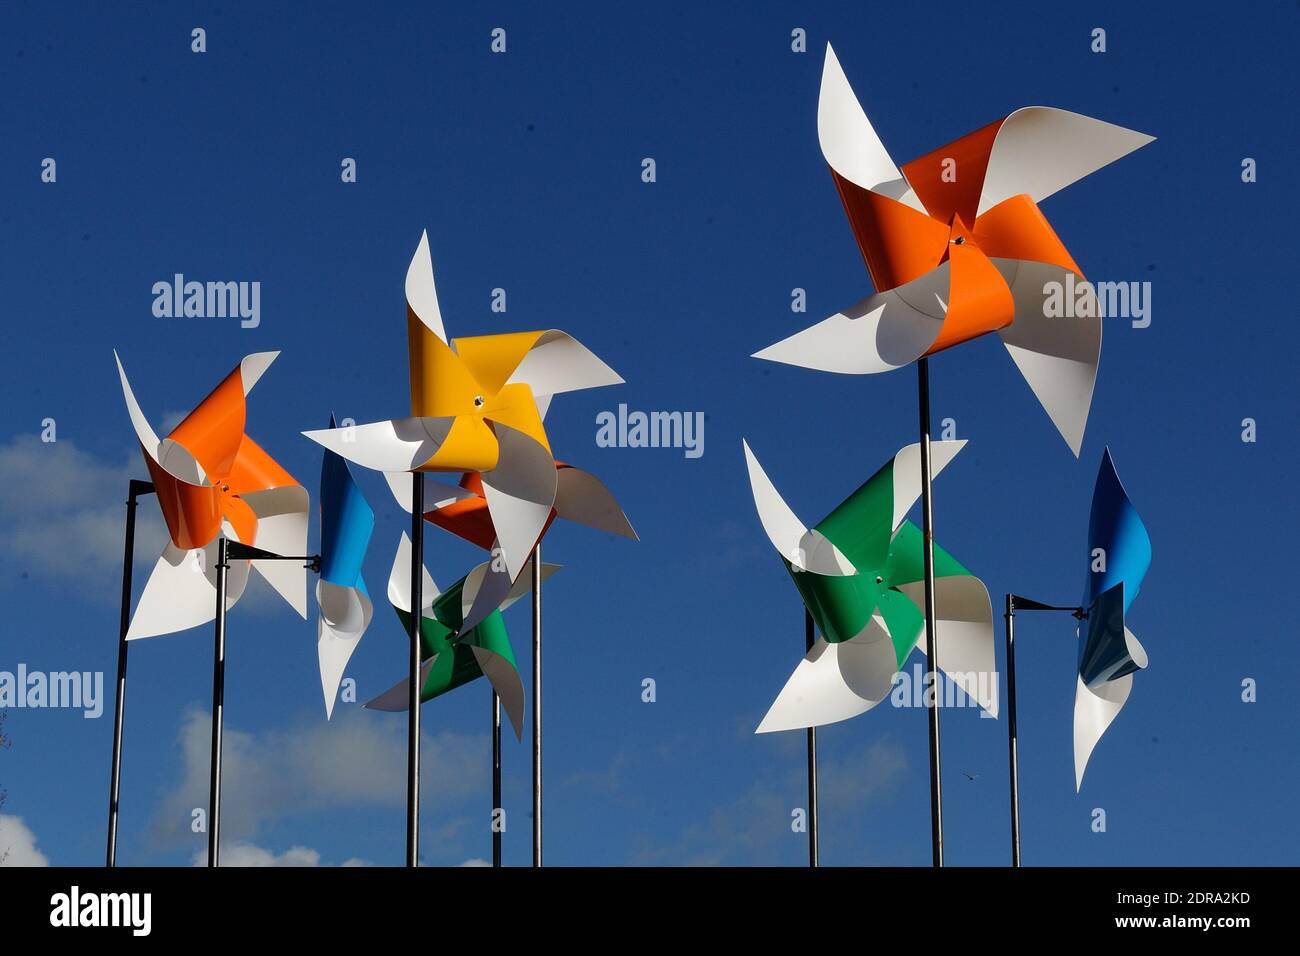 Windmill papers are displayed in Paris a week before the 21st session of the Conference of the Parties to the United Nations Framework Convention on Climate Change (COP 21 / CMP 11), which will take place in Paris from November 30 to December 11, 2015. Shot in Paris, France on November 22, 2015. Photo by Aurore Marechal/ABACAPRESS.COM Stock Photo